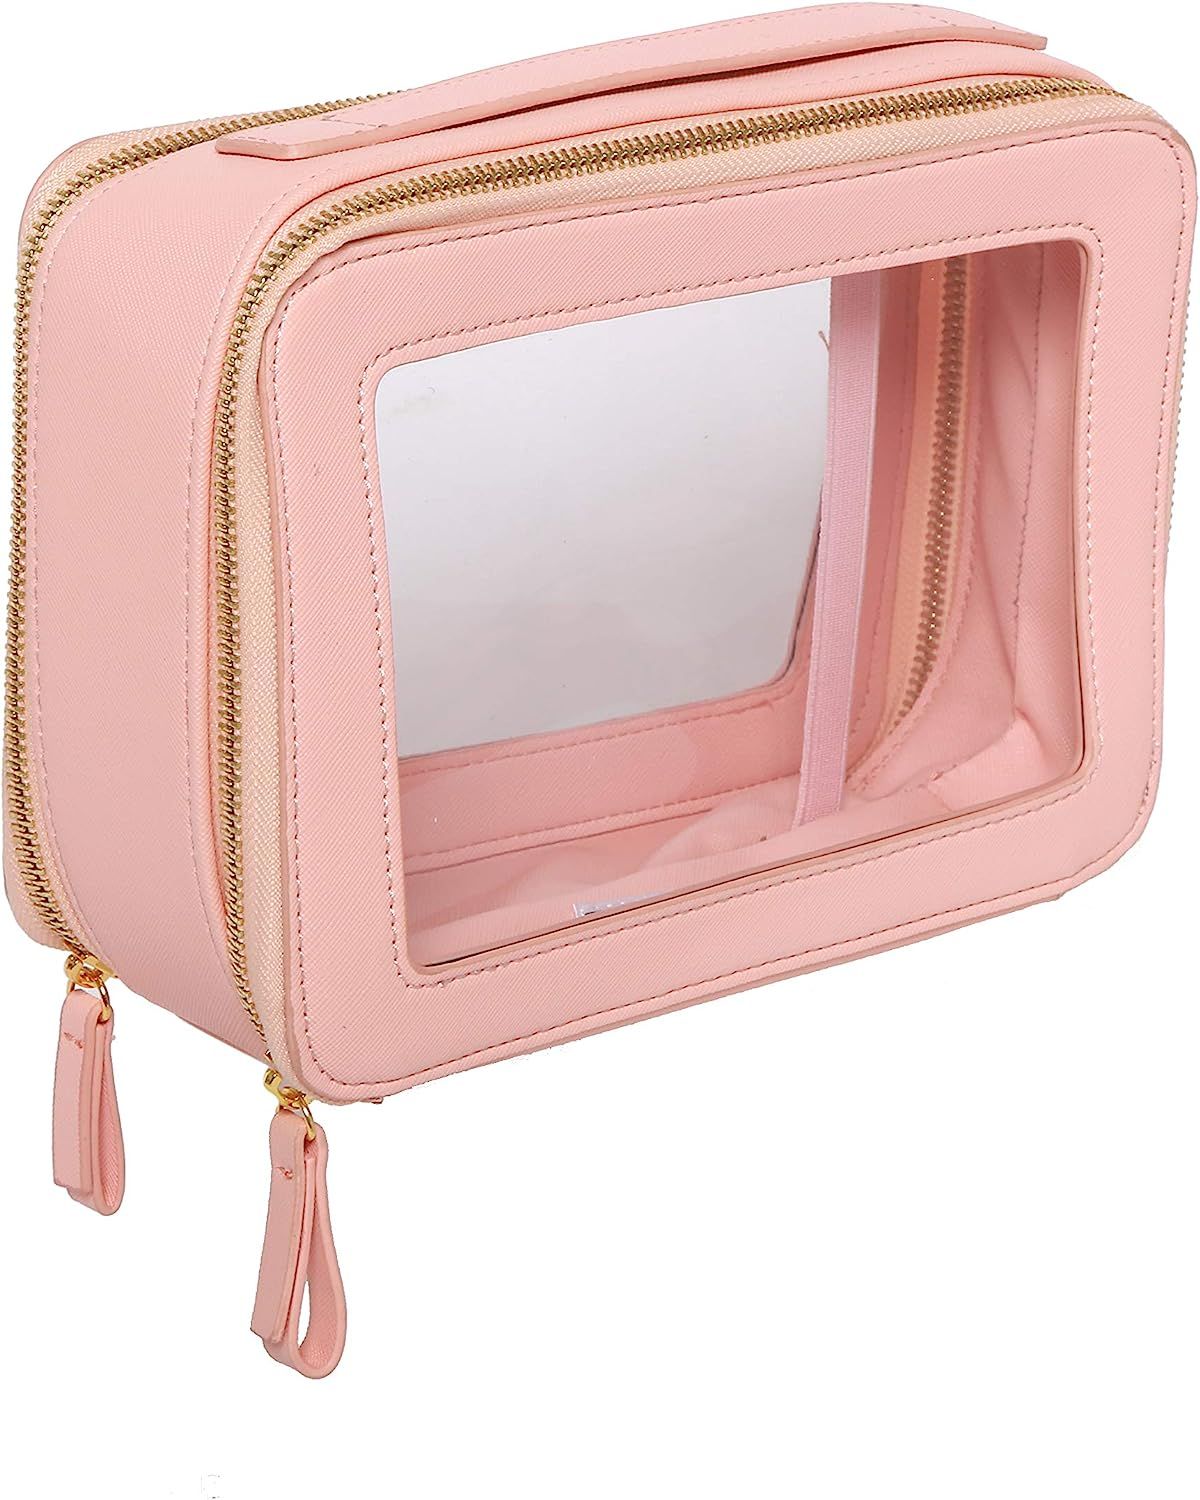 Clear Jetset Case, Jumbo Size, 2-Layer Compartments, Chic Cosmetics Makeup Bag for Travel (Pink) | Amazon (US)